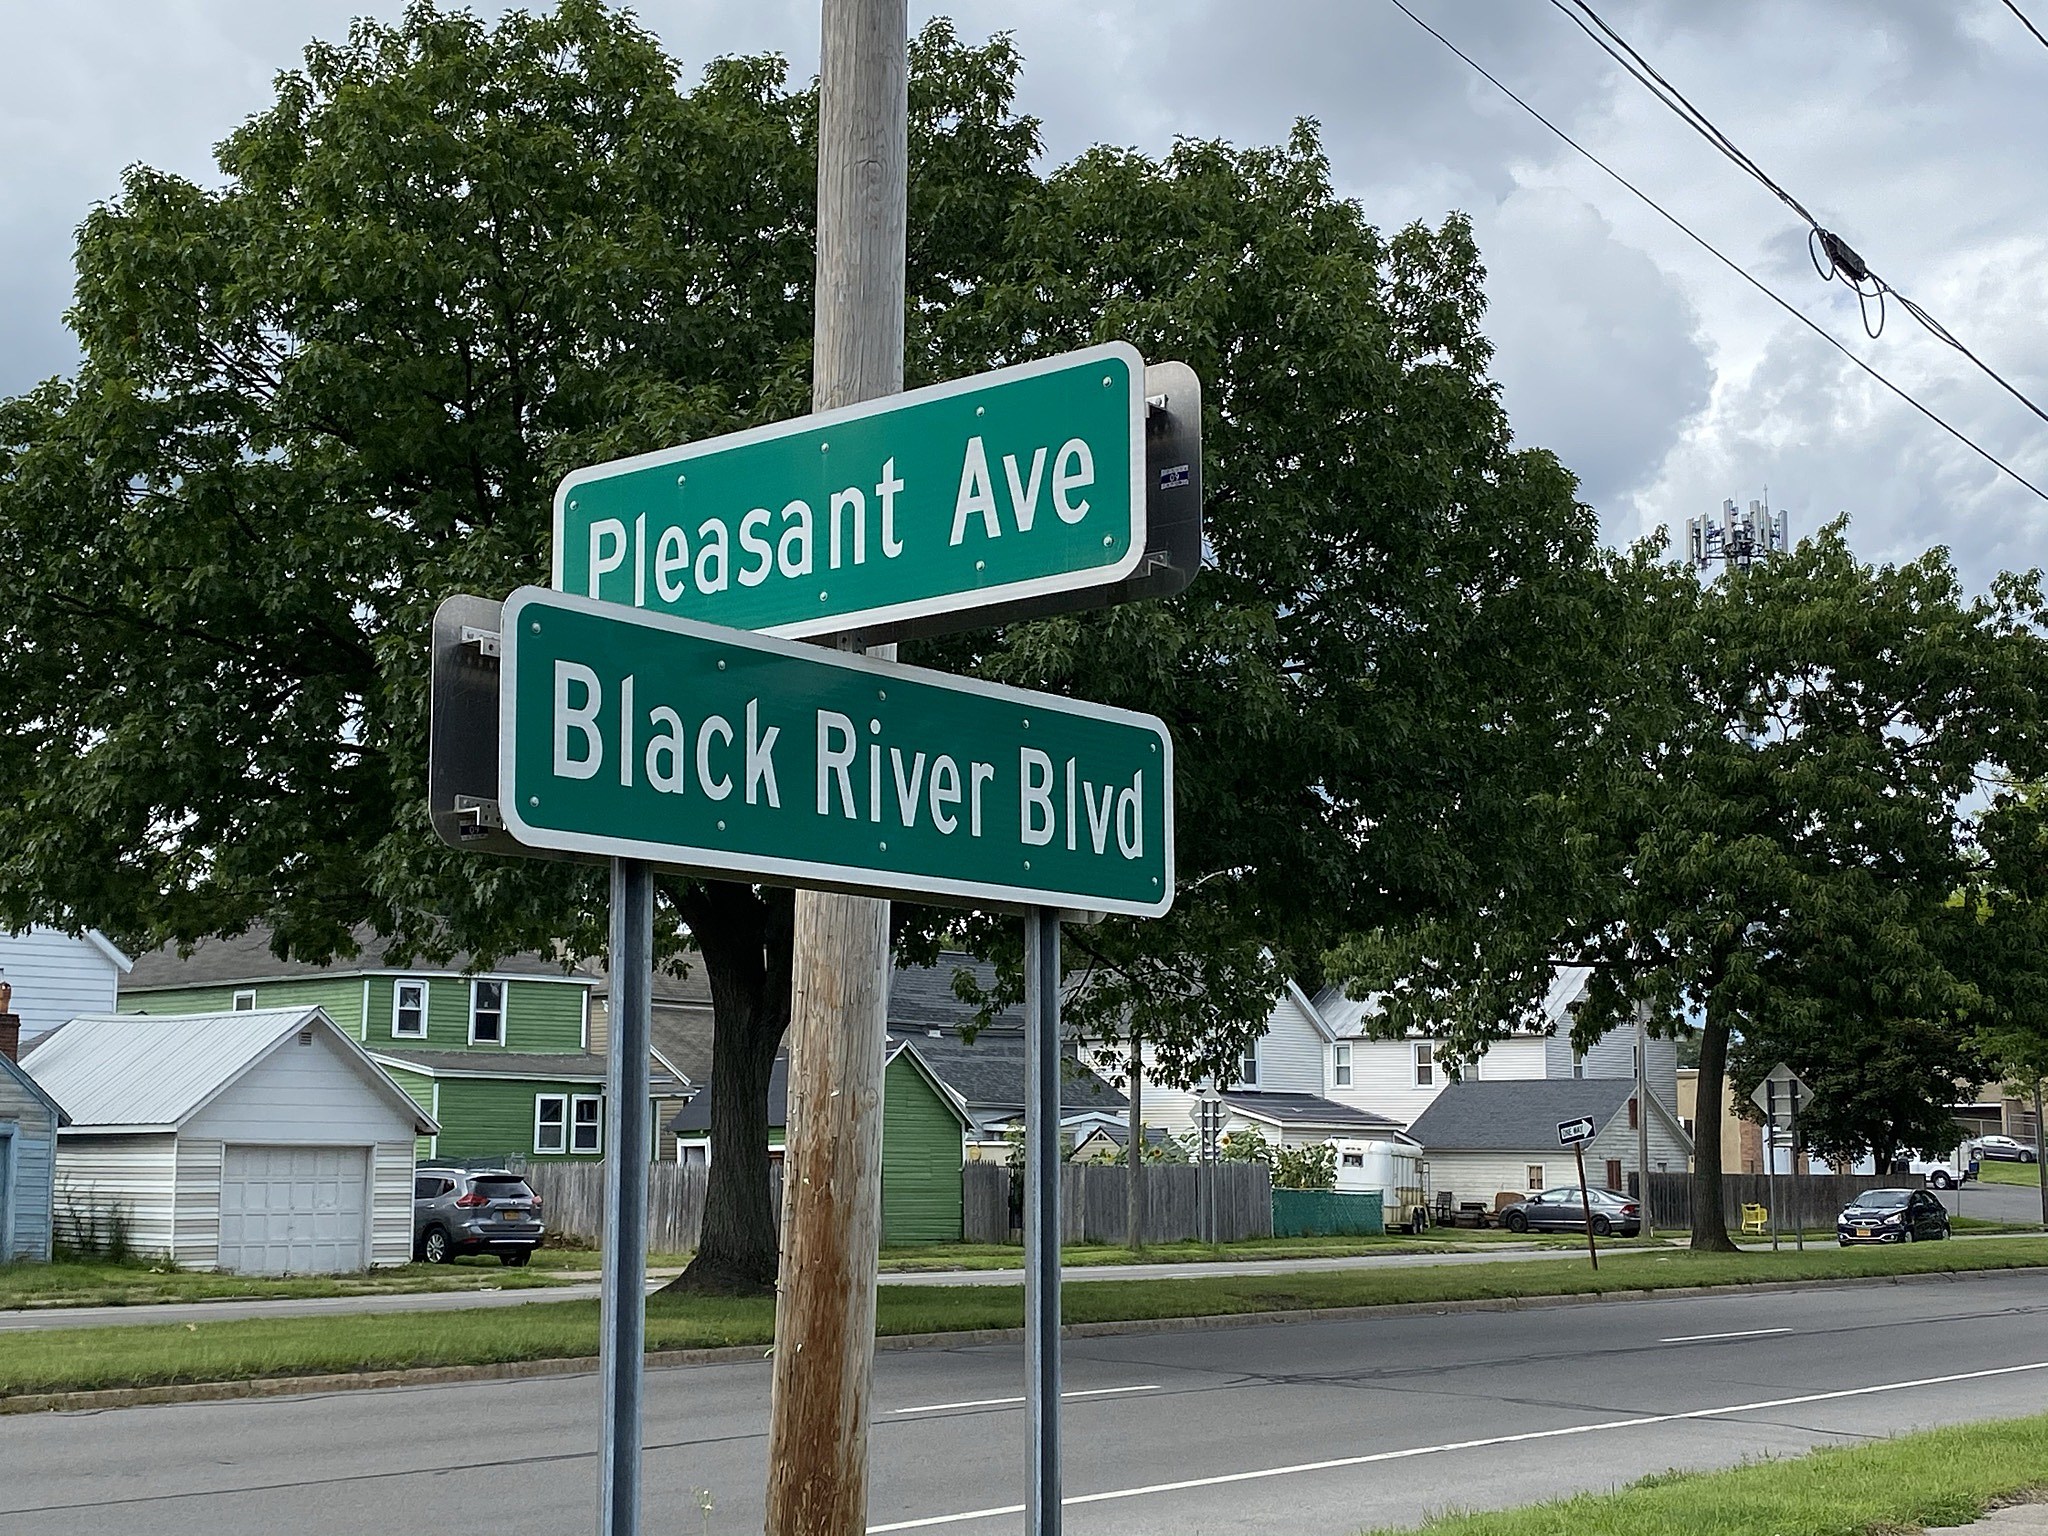 Every City In Central NY Needs To Do Their Street Signs Like Rome pic